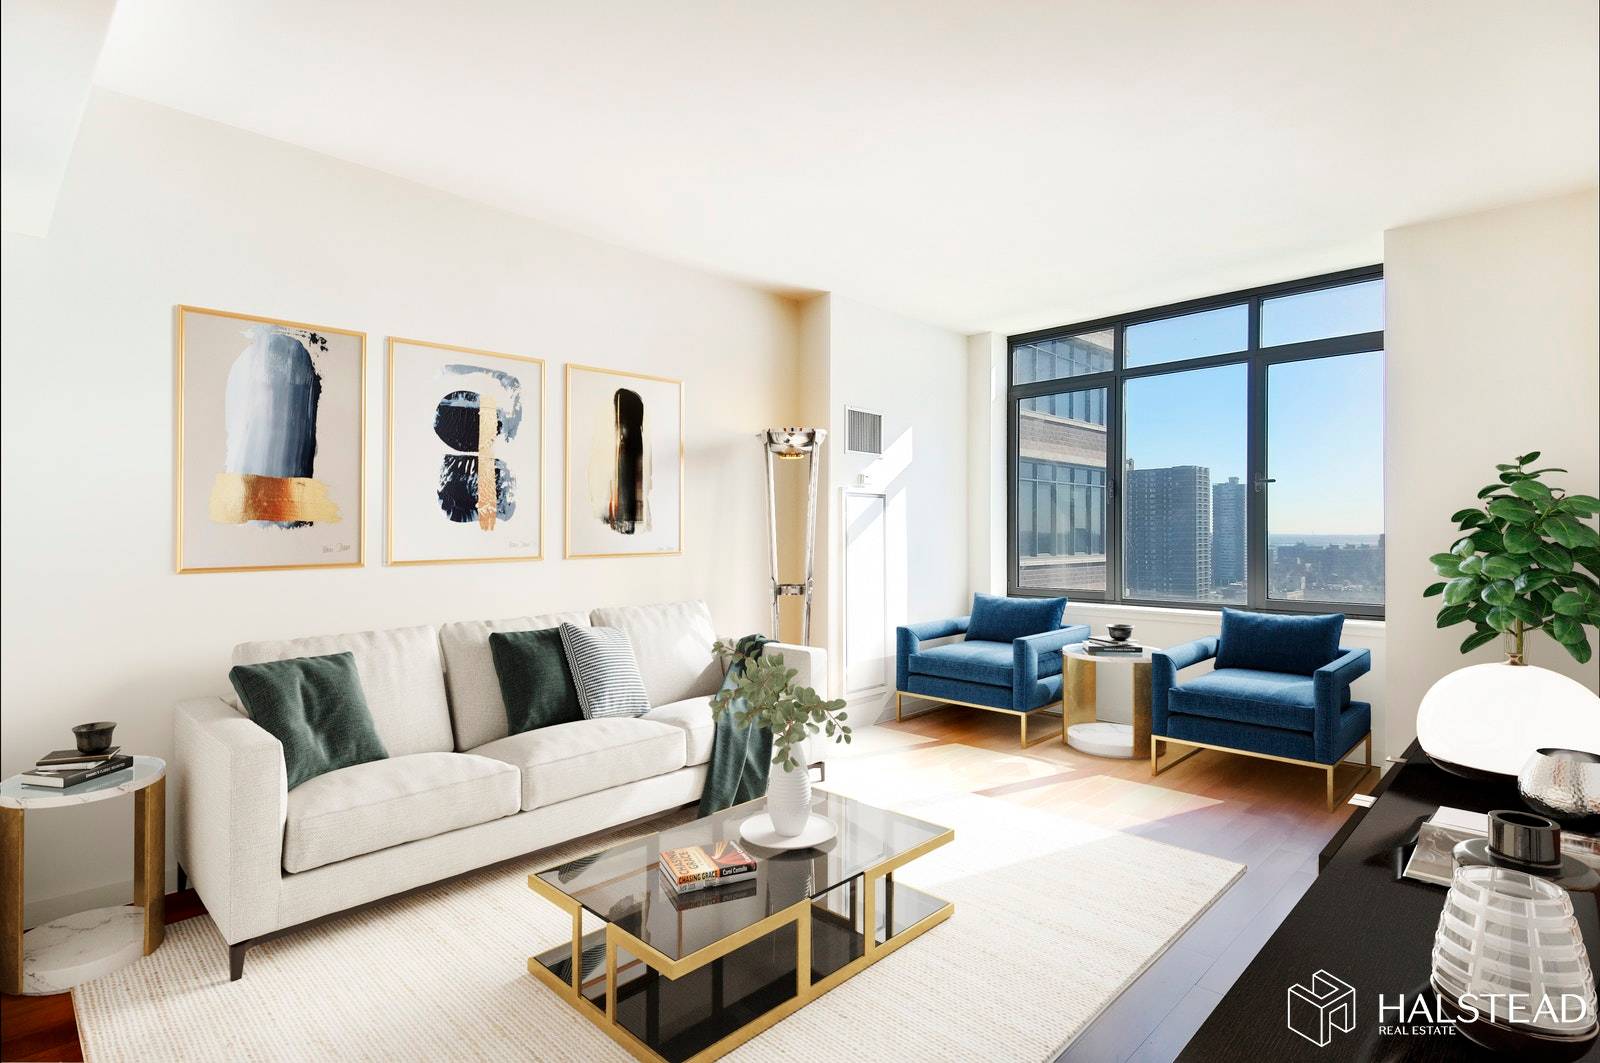 Find a generous floor plan combined with new construction convenience in this 2 BR, 2 BA situated in a prime location on Fifth Avenue, adjacent to Harlem's Marcus Garvey Park.